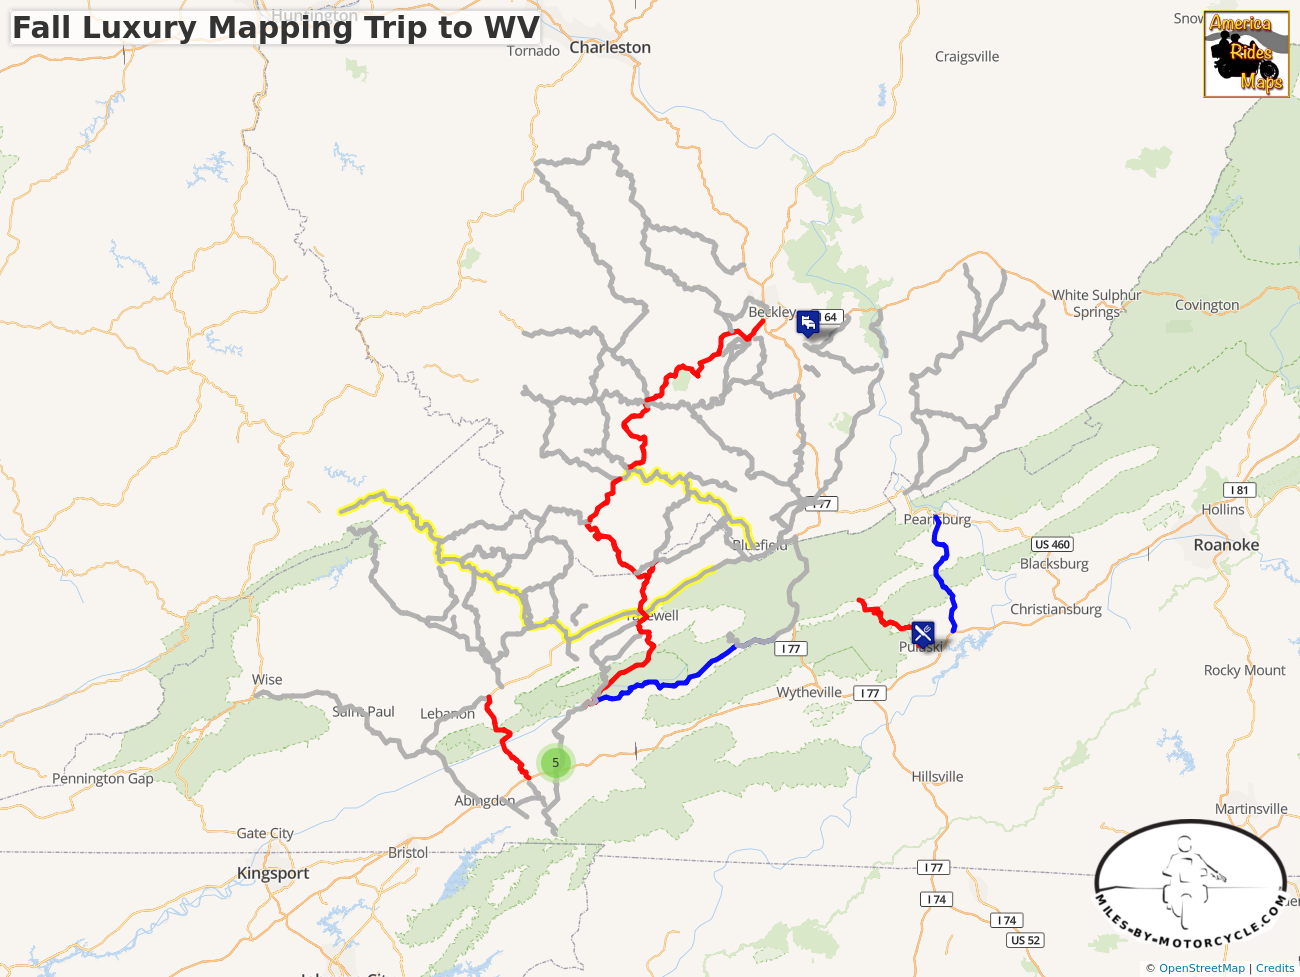 Fall Luxury Mapping Trip to WV